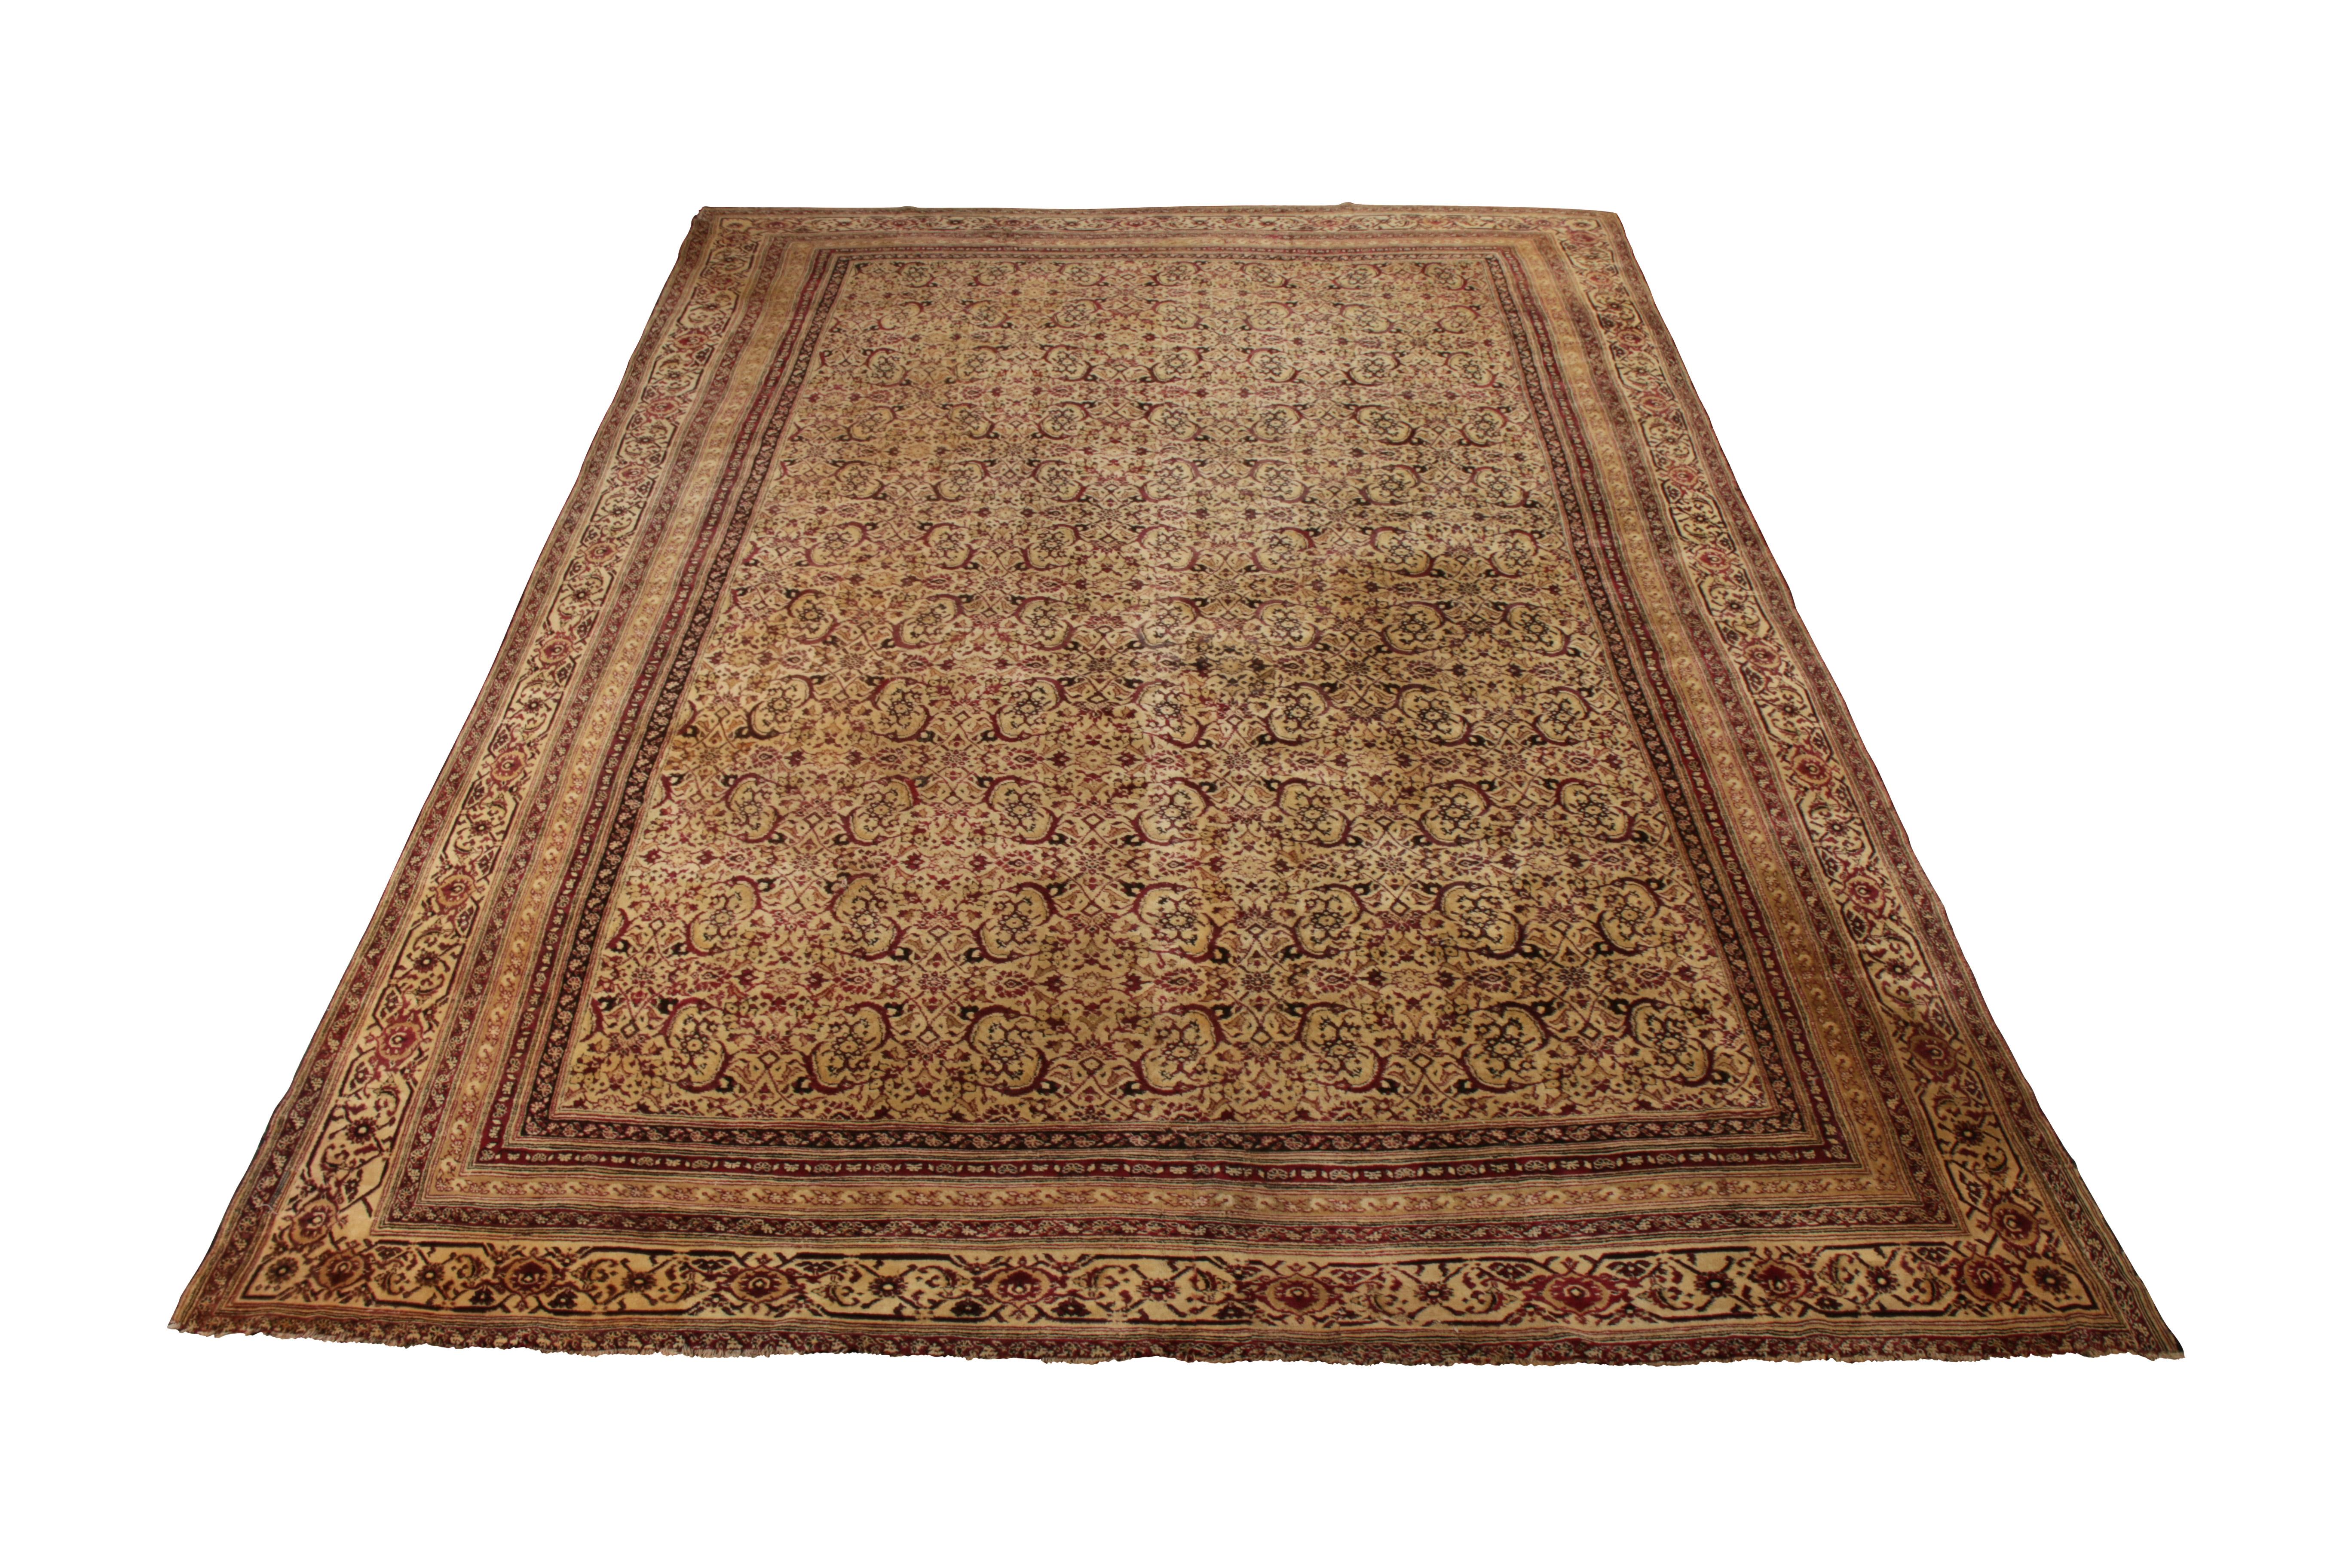 Hand-Knotted Hand Knotted Antique Rug in Beige-Brown All-Over Floral Pattern For Sale